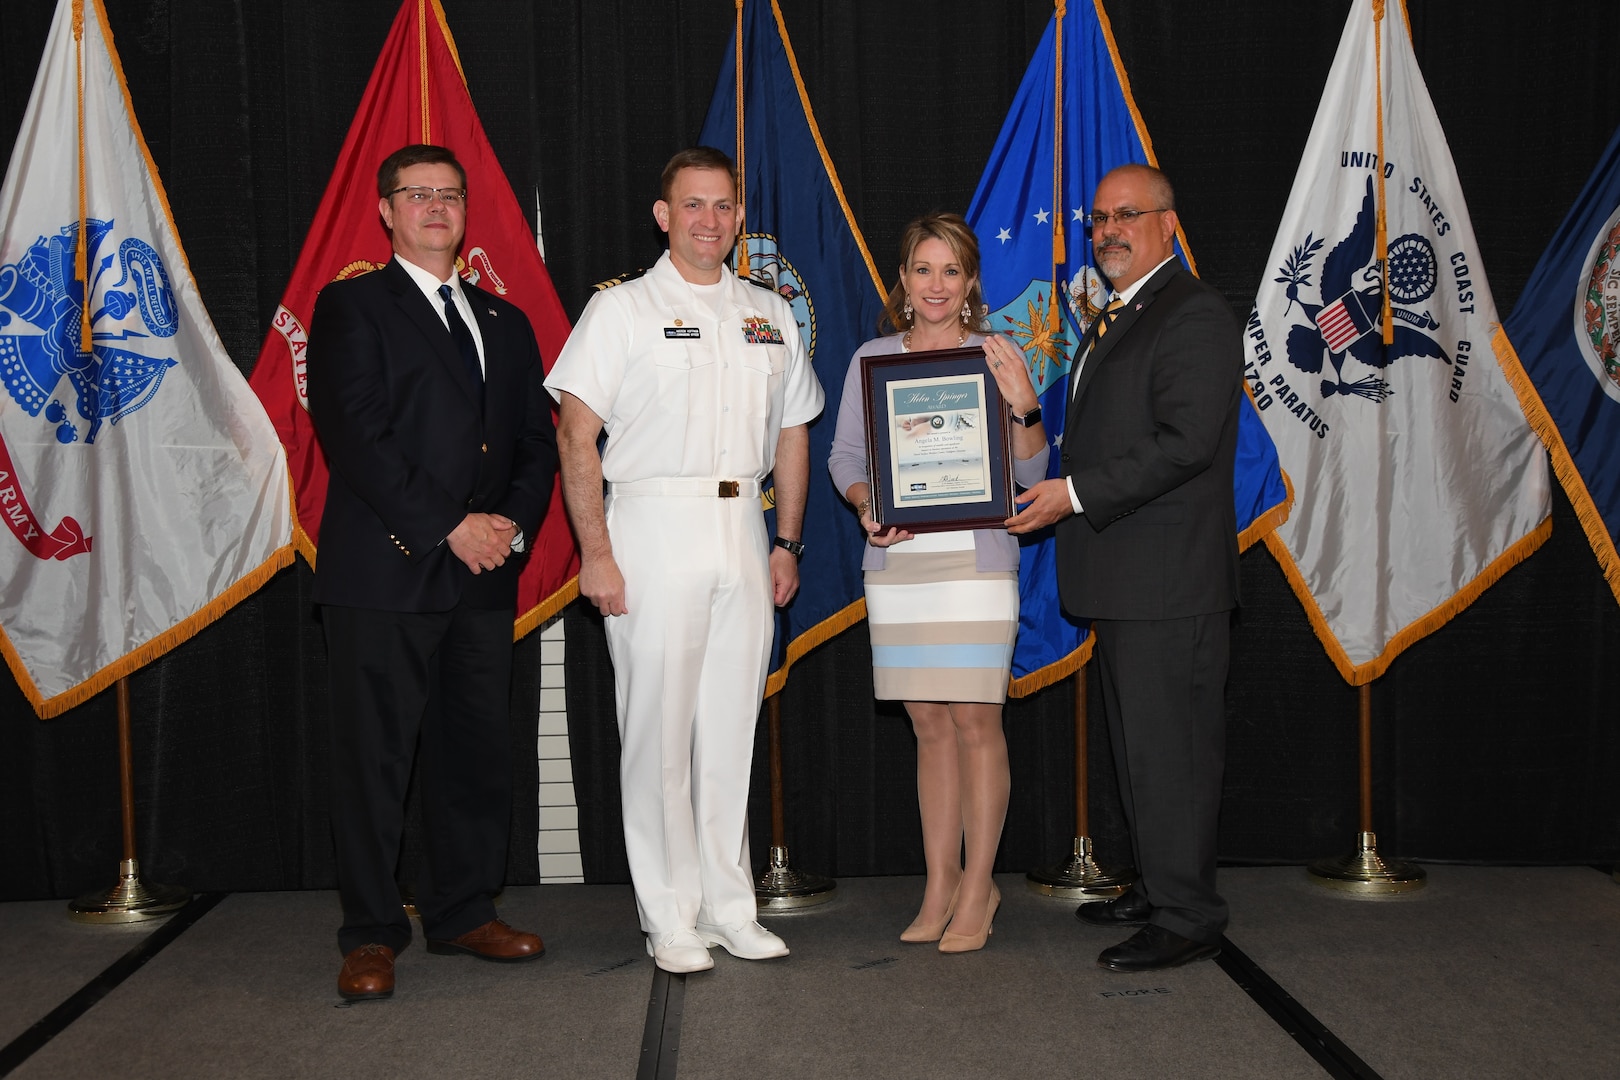 IMAGE: Angela Bowling is presented the Helen Springer Award at Naval Surface Warfare Center Dahlgren Division's annual awards ceremony, Apr. 26 at the Fredericksburg Expo and Conference Center.

The award recognizes individuals who have made a notable and significant impact to business operations at NSWCDD. The award was named in honor of Helen Springer, a former NSWCDD Deputy Human Resources Director who was instrumental in transforming business operations at Dahlgren from a paper-based system to an electronic environment.